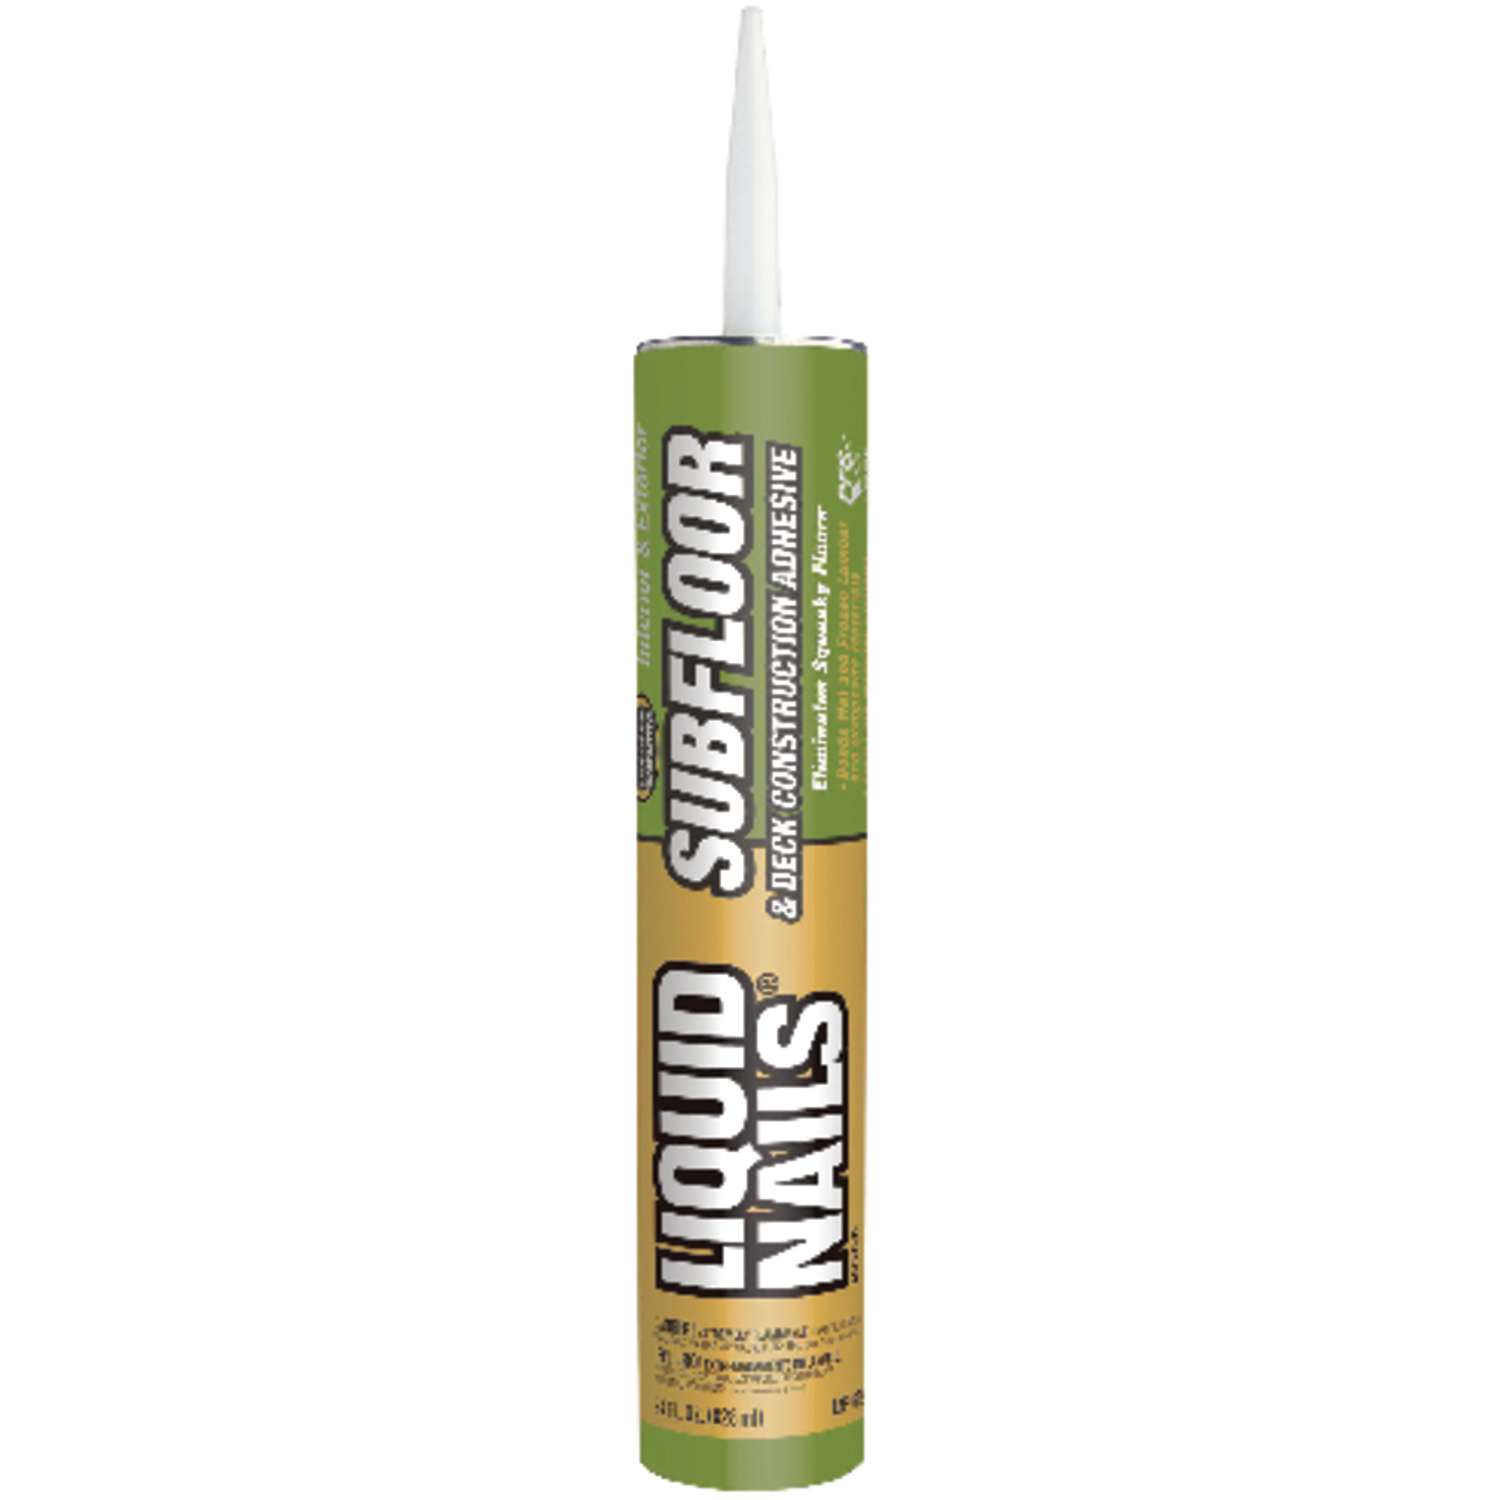 Liquid Nails Subfloor & Deck Synthetic Rubber Construction Adhesive 28